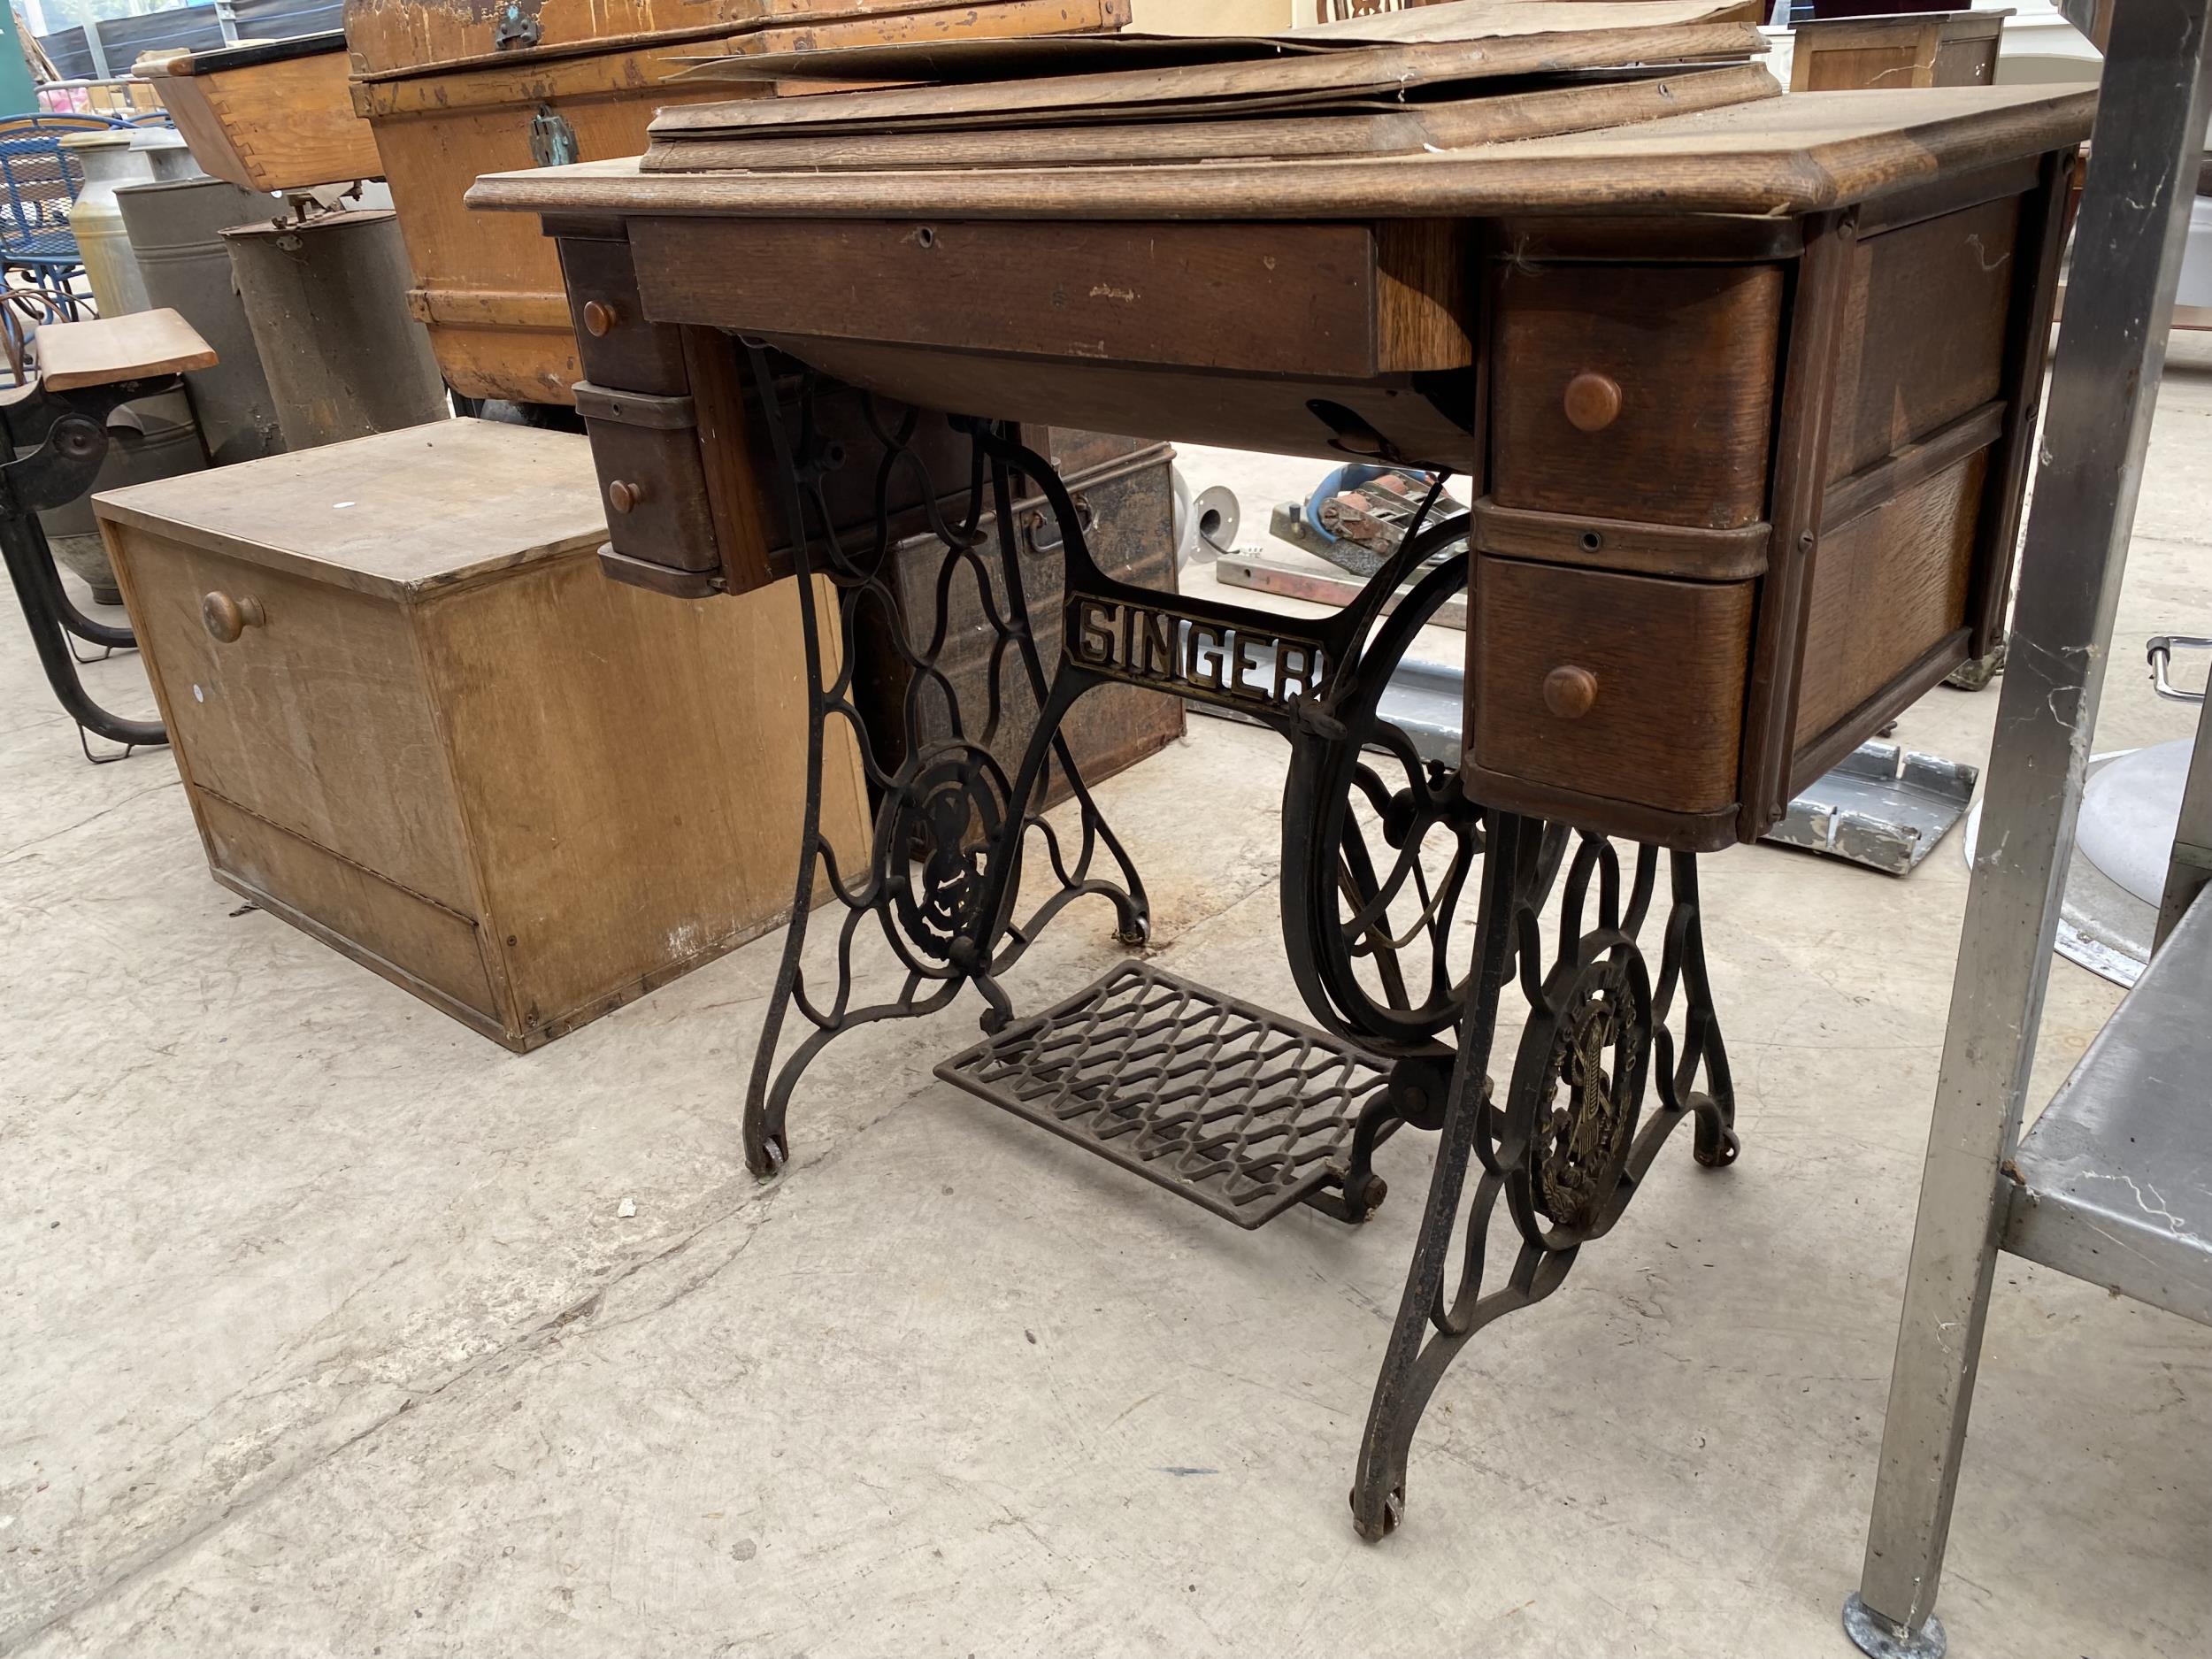 A VINTAGE SINGER SEWING MACHINE WITH CAST TREDDLE BASE - Image 3 of 5